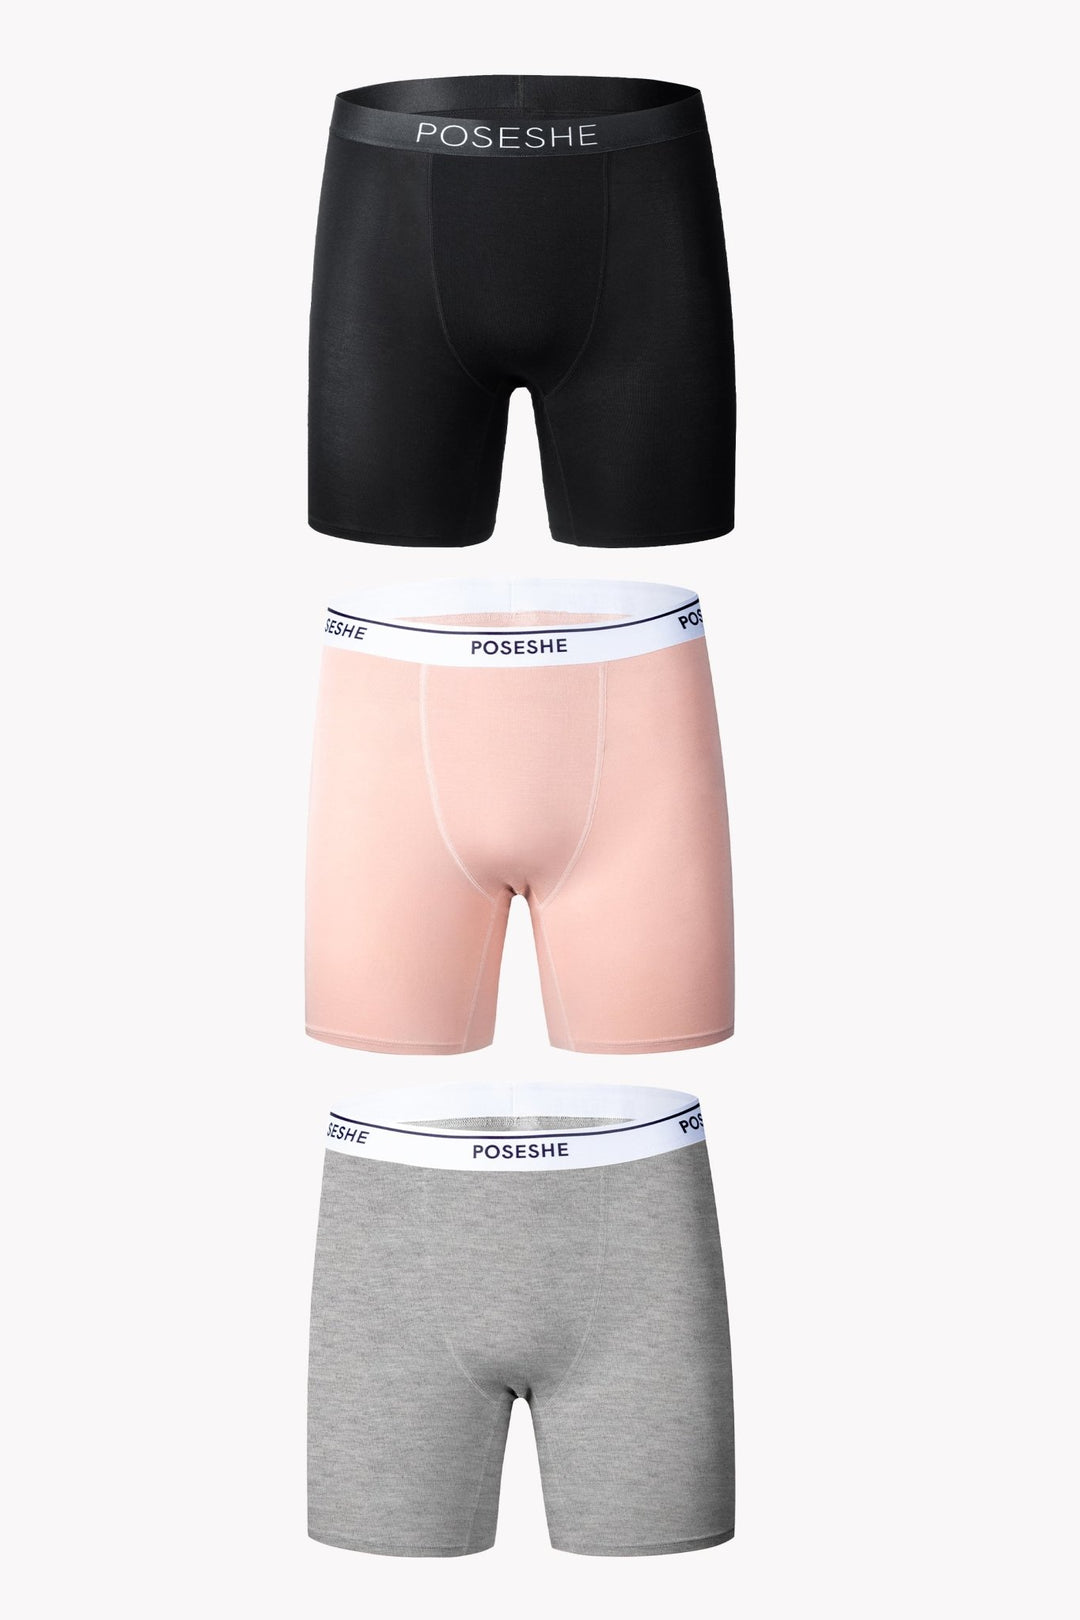 Body Liberator High-Waisted Boxer Briefs (Period Friendly) 3 Pack